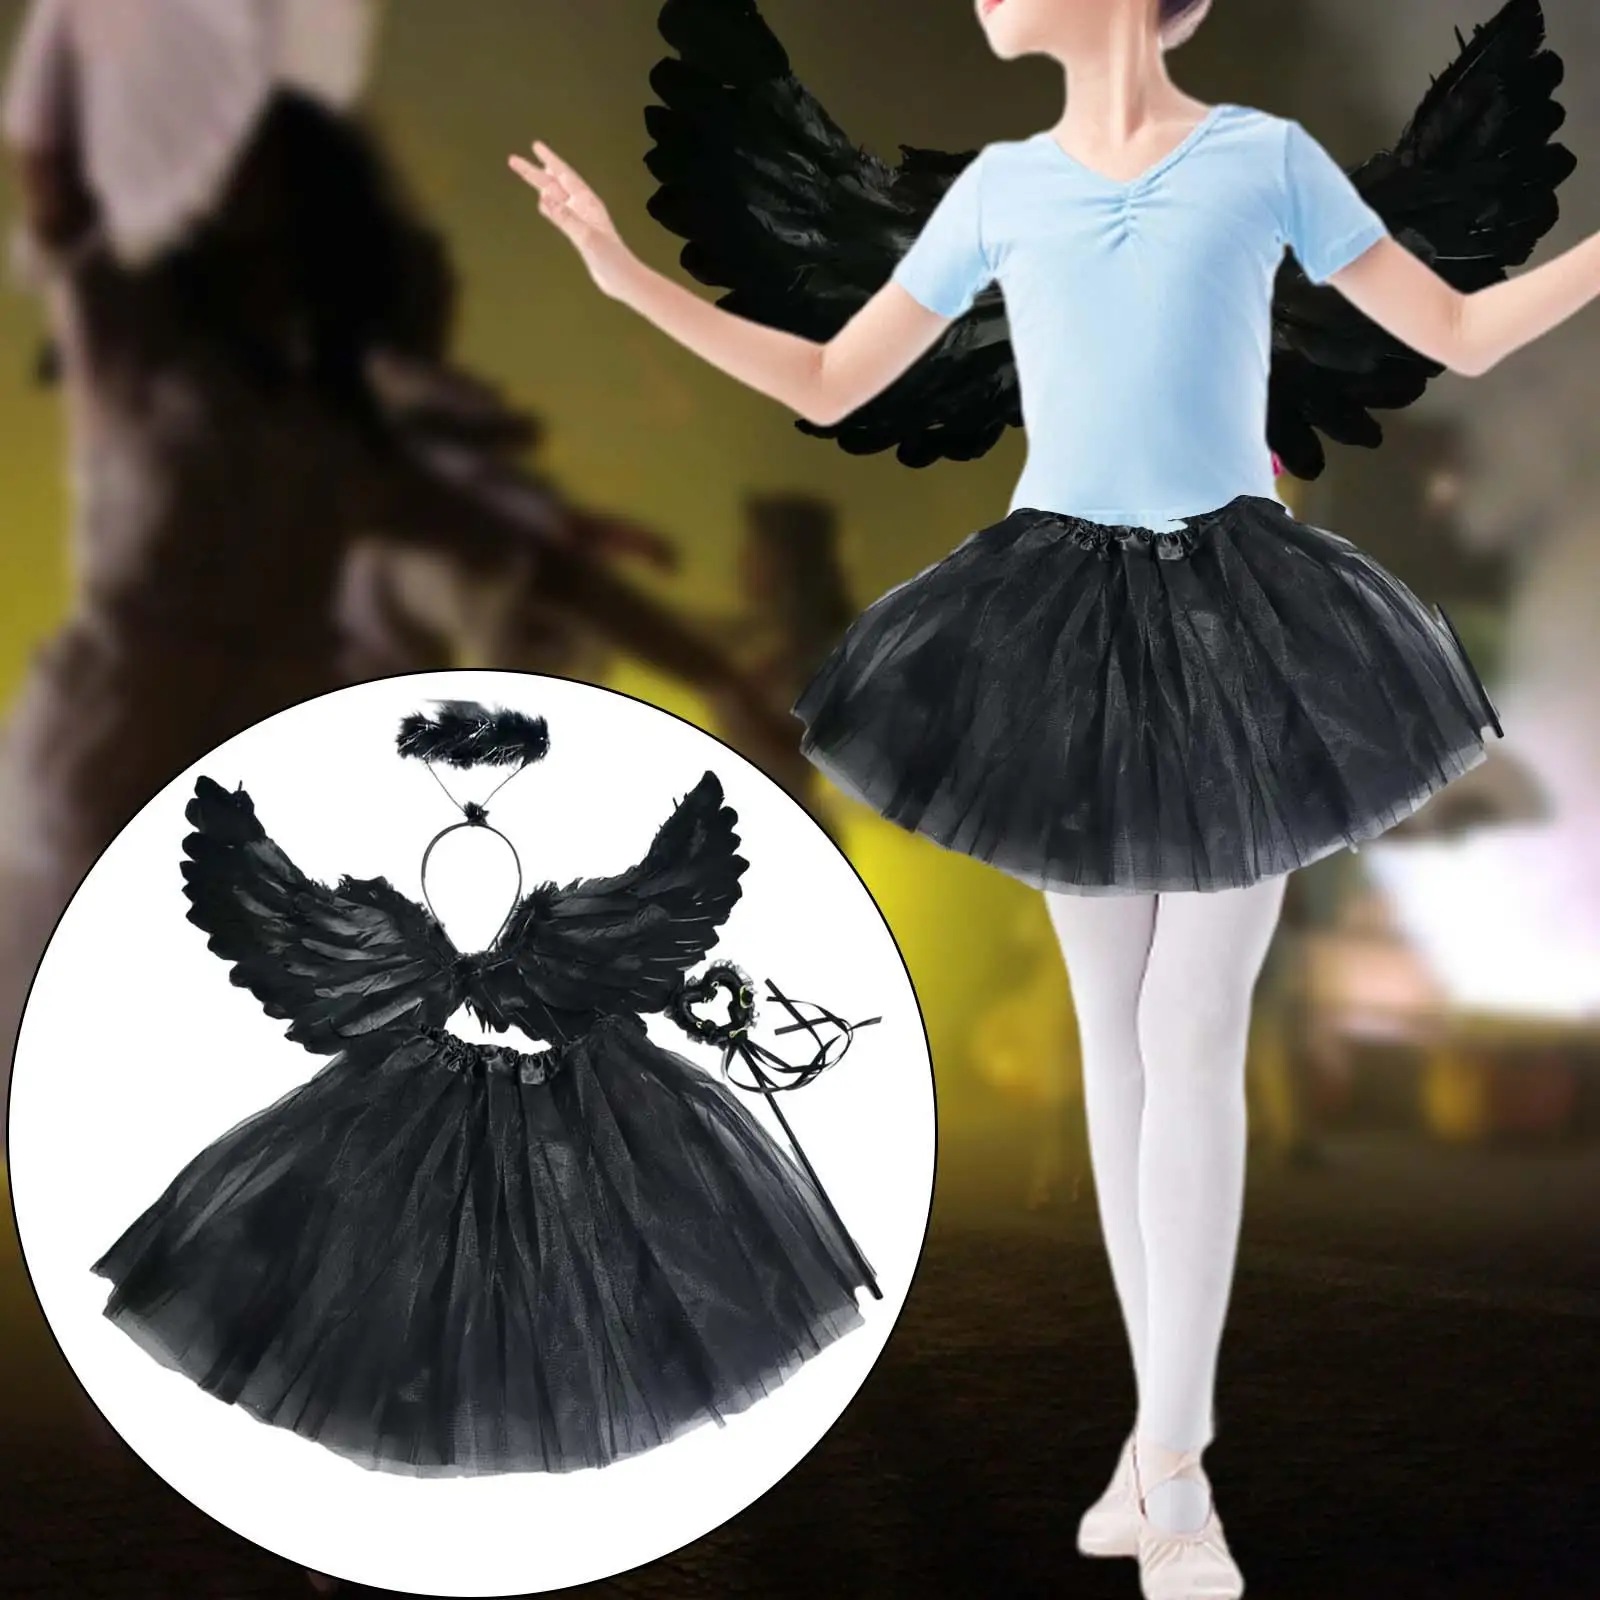 Girls Fairy Costume Set Angel Wing Halloween Costume Outfit for Photo Props Masquerade Festival Stage Performance Birthday Party